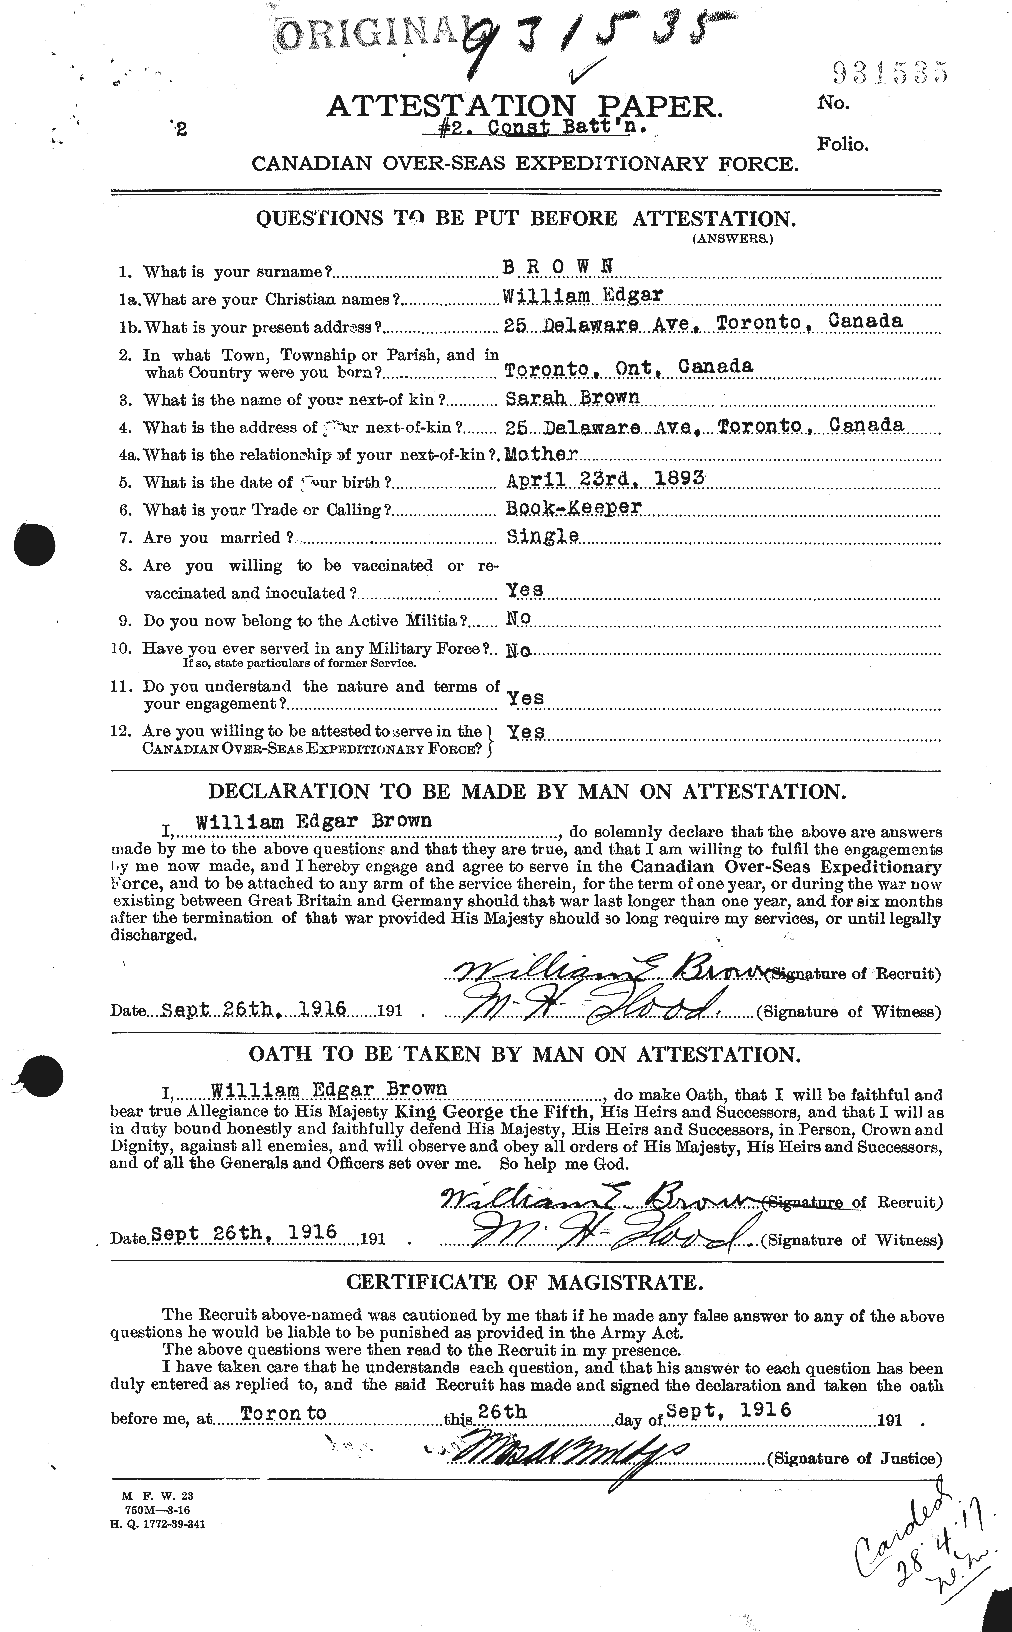 Personnel Records of the First World War - CEF 268257a